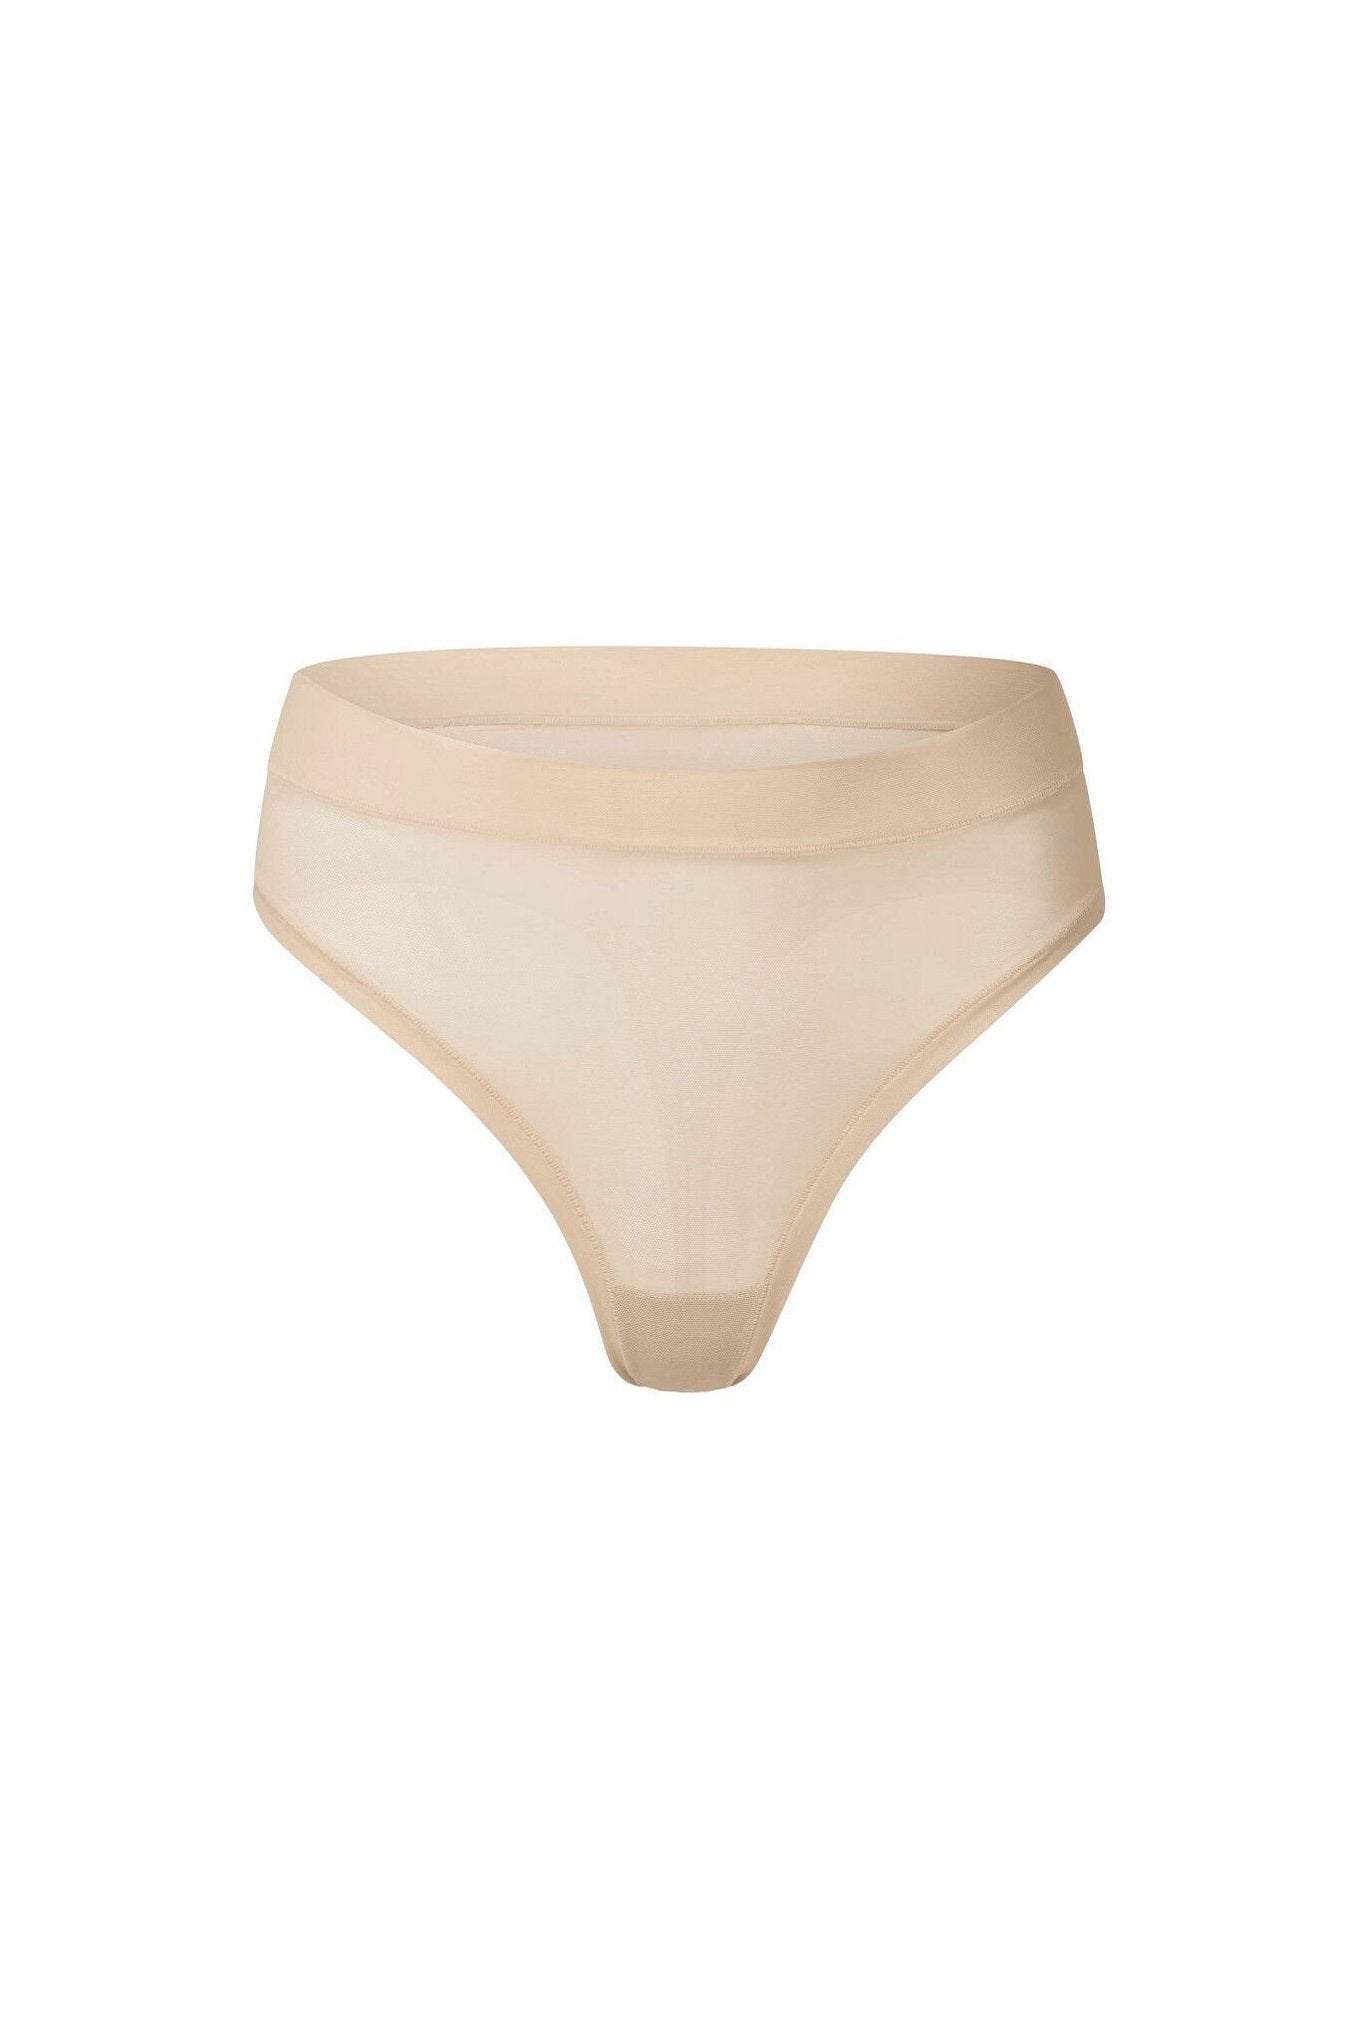 nueskin Carey Mesh Mid-Rise Thong in color Dawn and shape thong